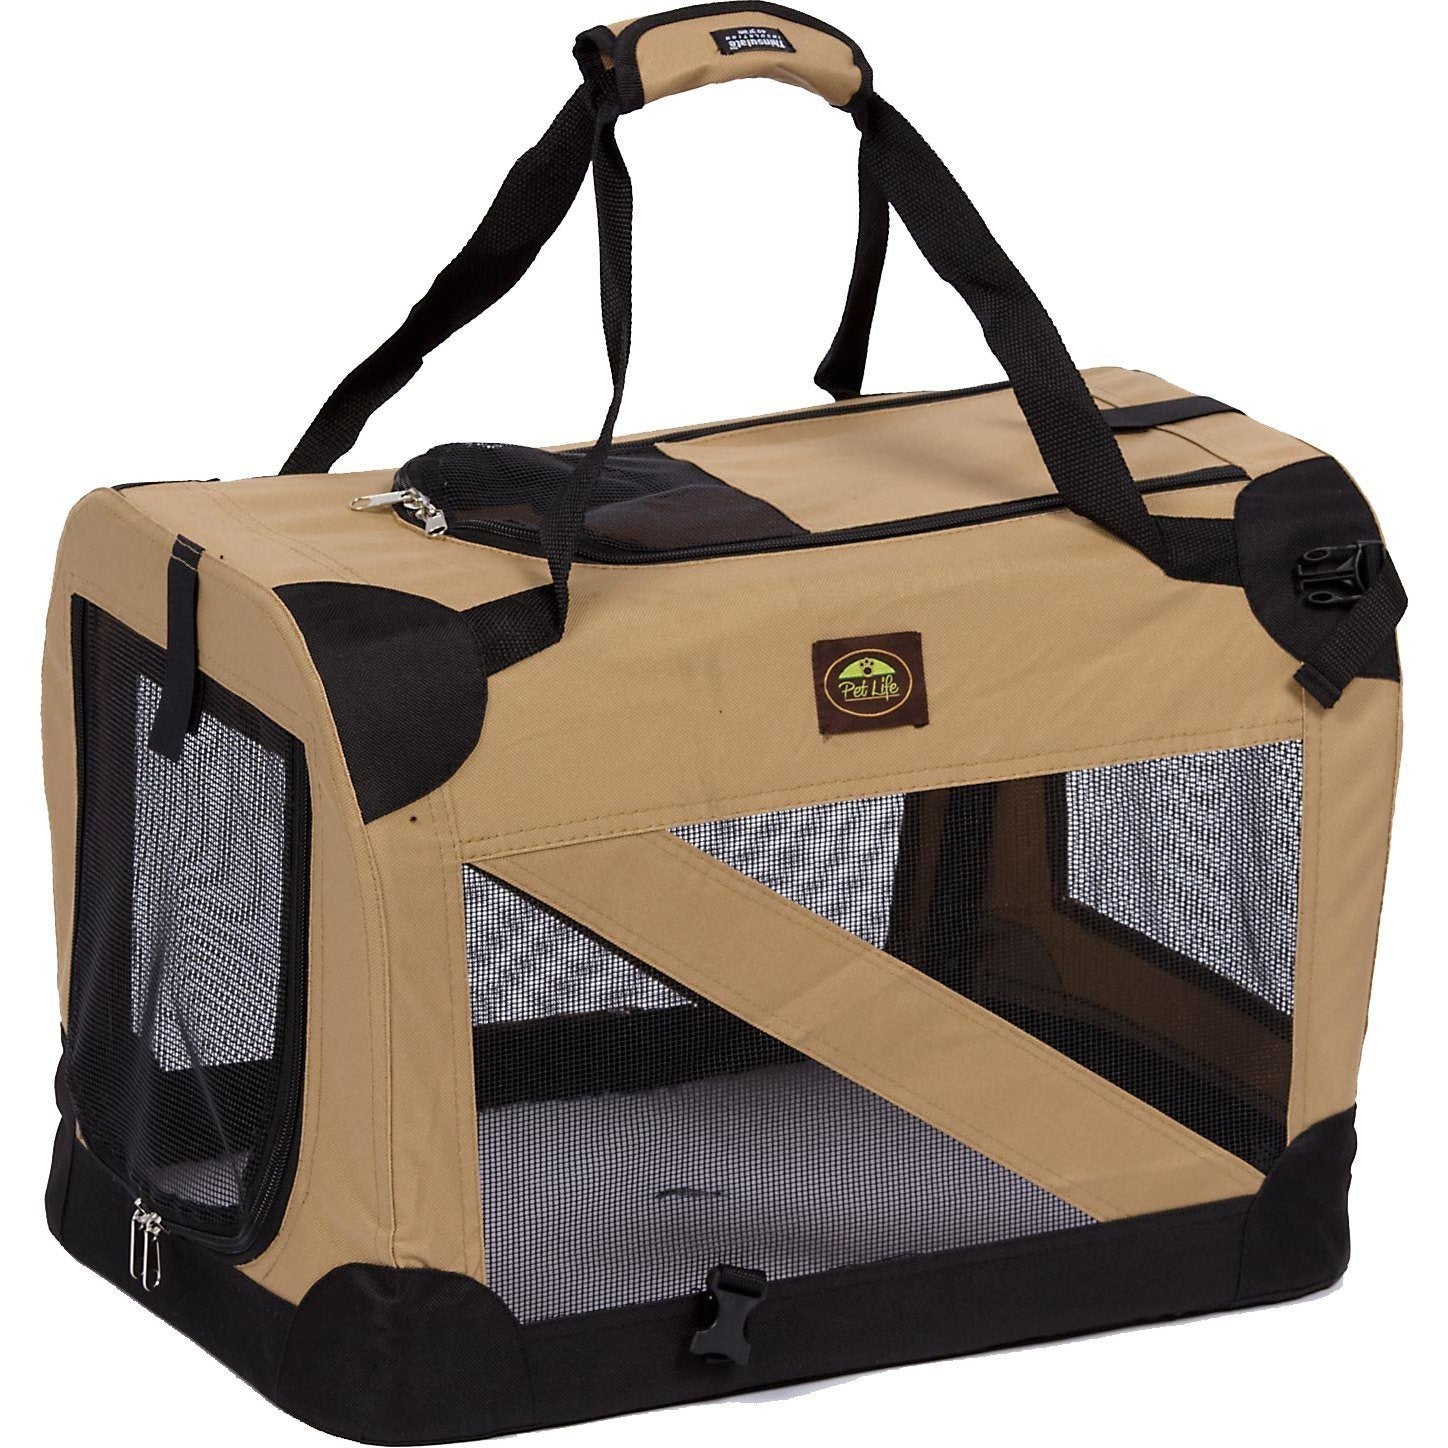 Pet Life ® '360° Vista View' Zippered Soft Folding Collapsible Durable Metal Framed Pet Dog Crate House Carrier X-Small Khaki